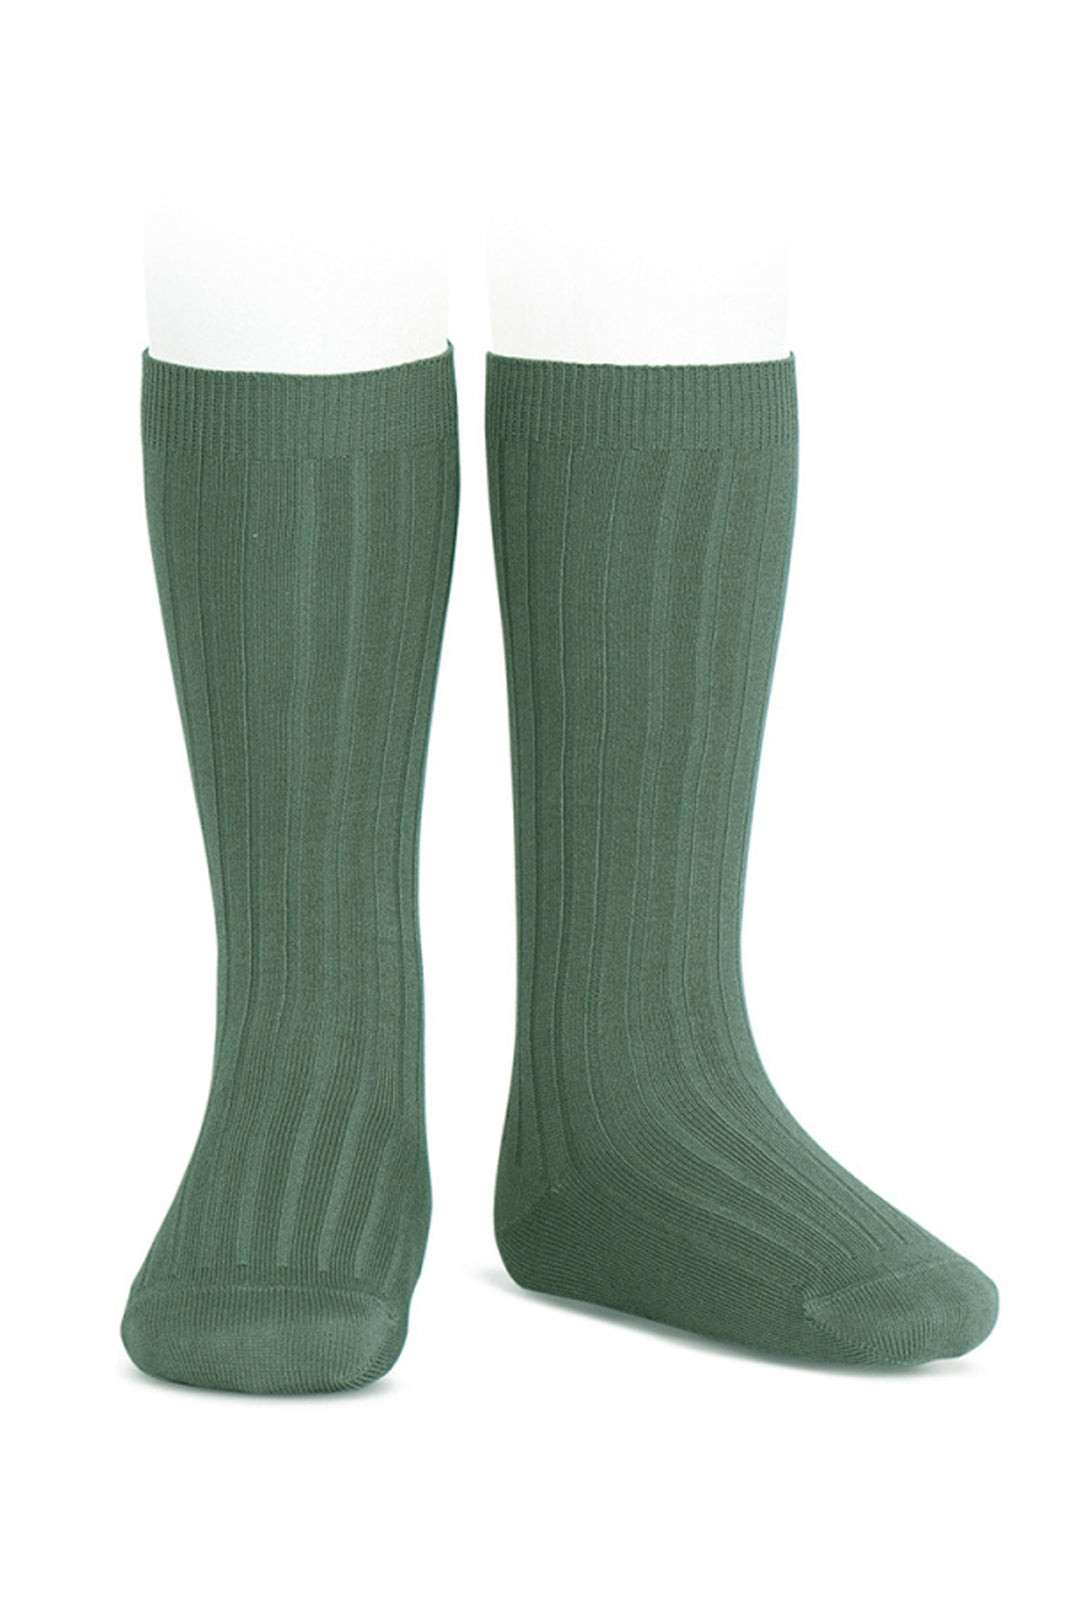 Condor Moss Green Wide Ribbed Knee High Socks | Millie and John